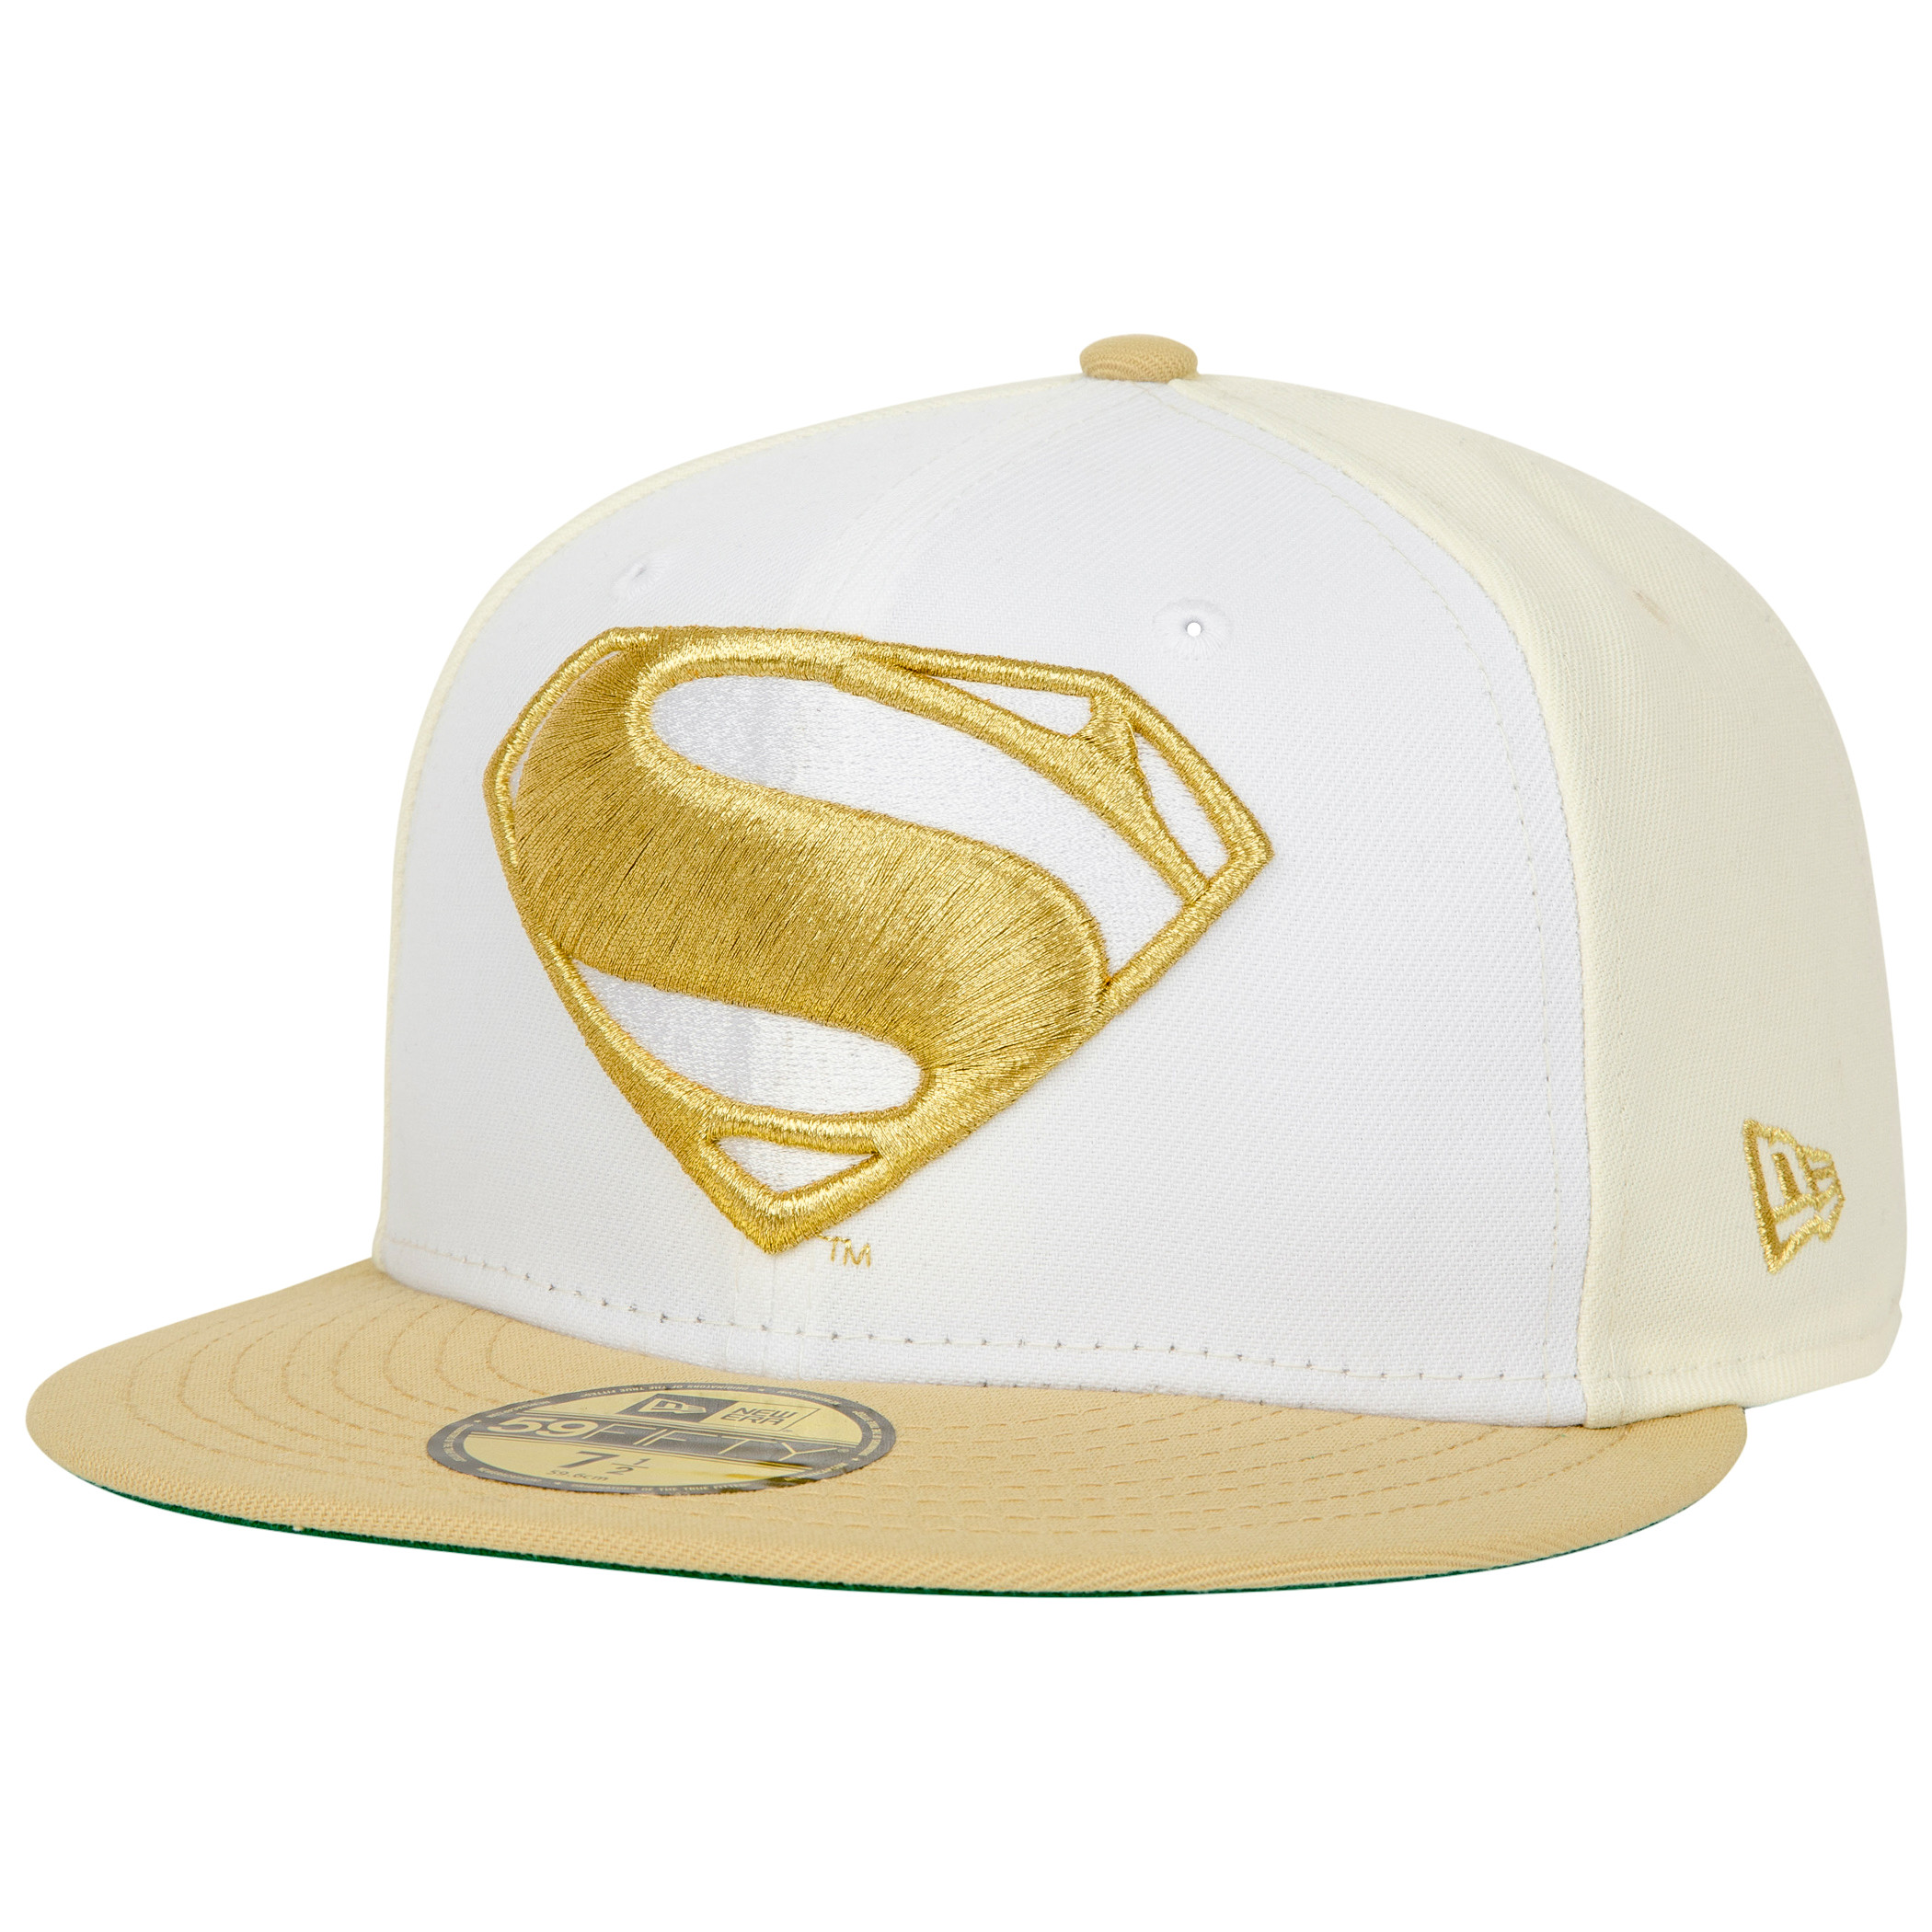 New Era Superman Gold Logo Black Colorway 59Fifty Fitted Hat (7 1